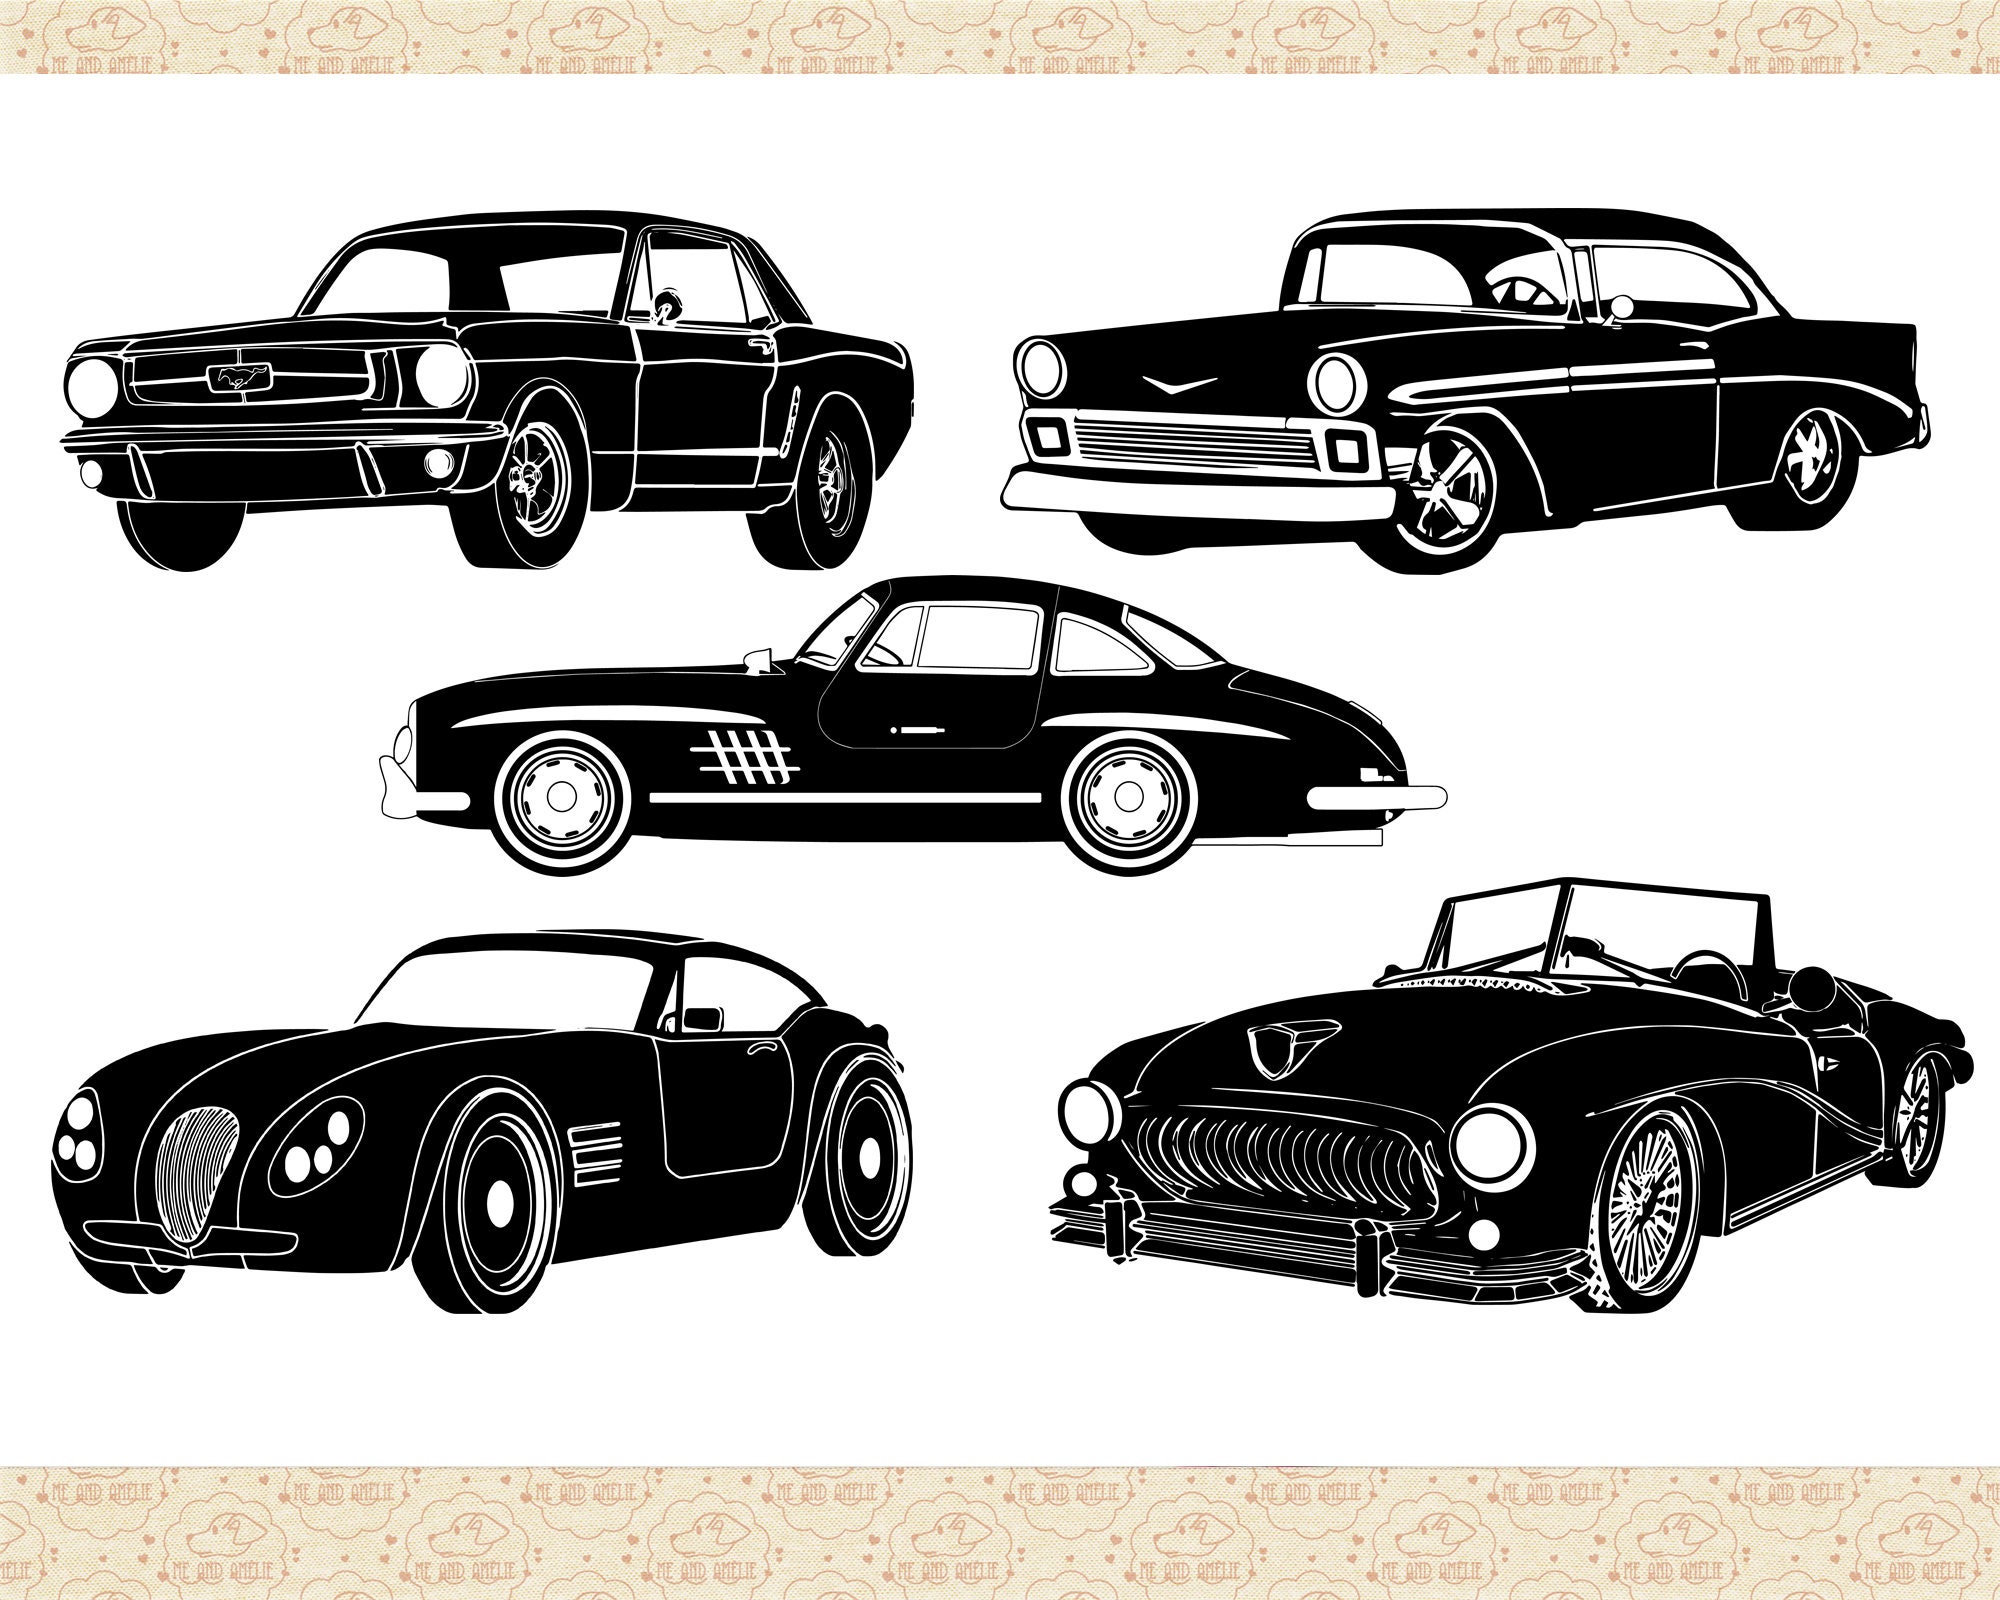 Retro Car Silhouette. Line Art. for Use on Logos, Icons, Covers